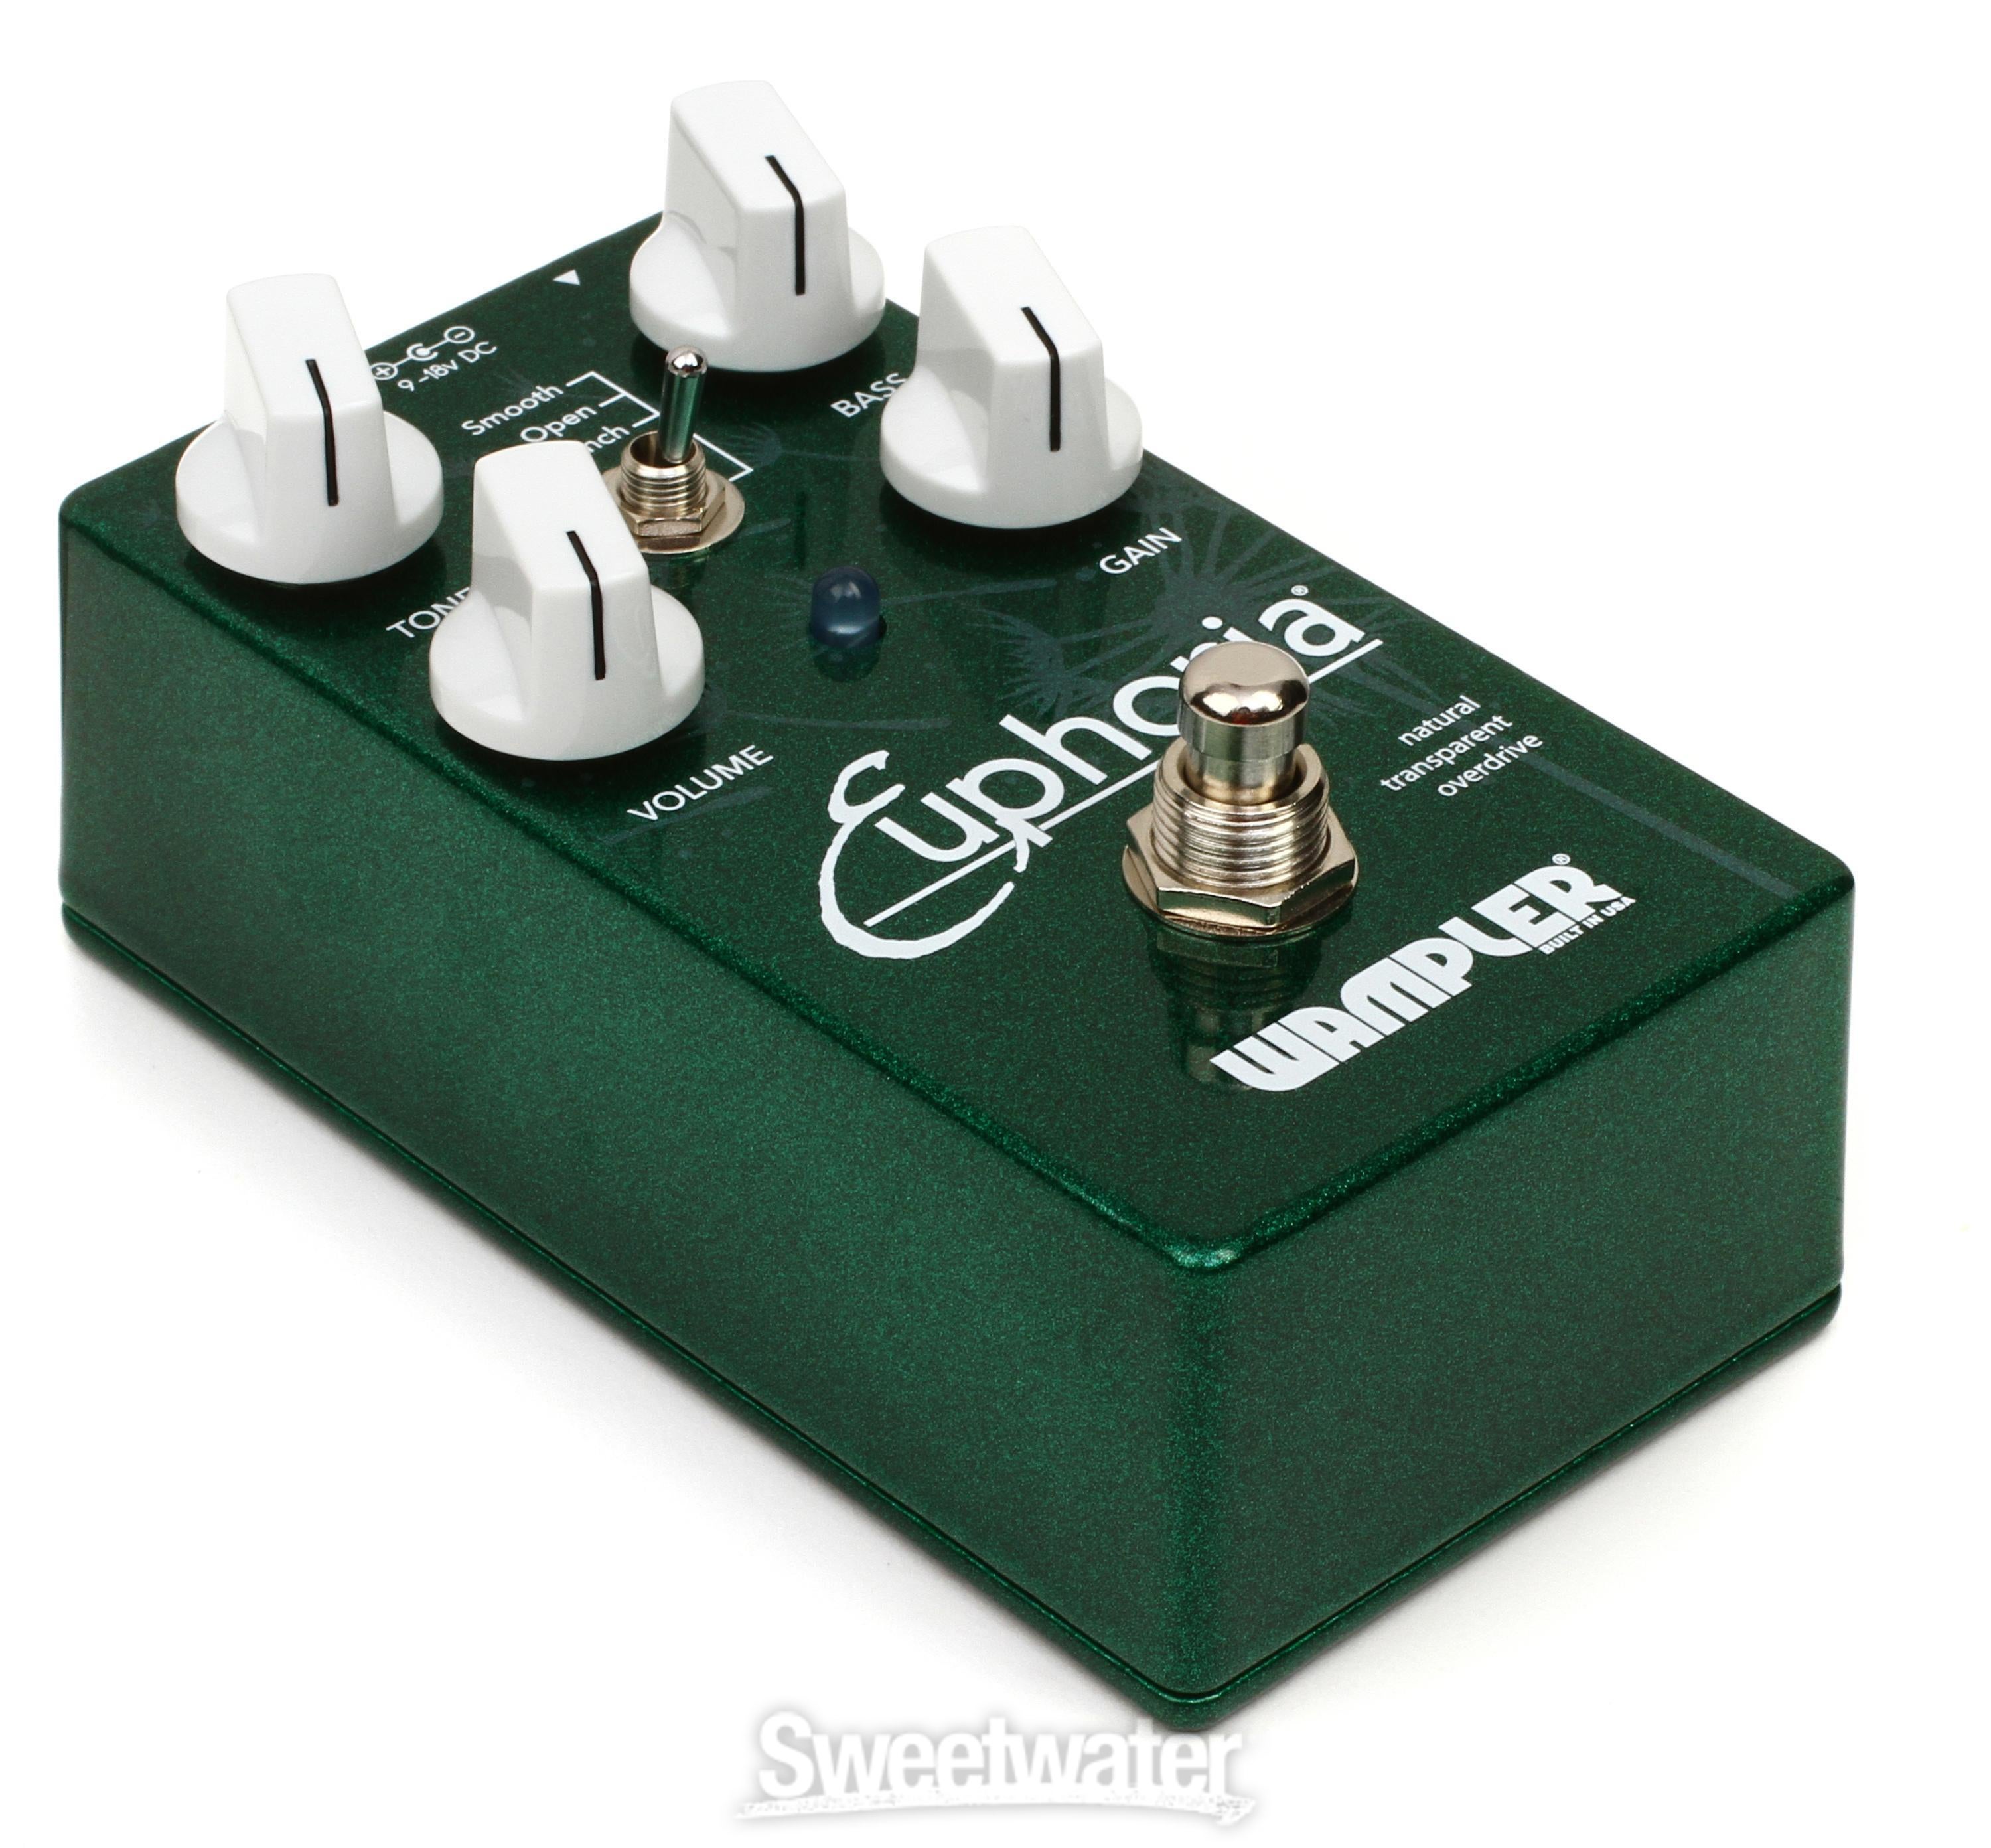 Euphoria Overdrive Pedal - Sweetwater